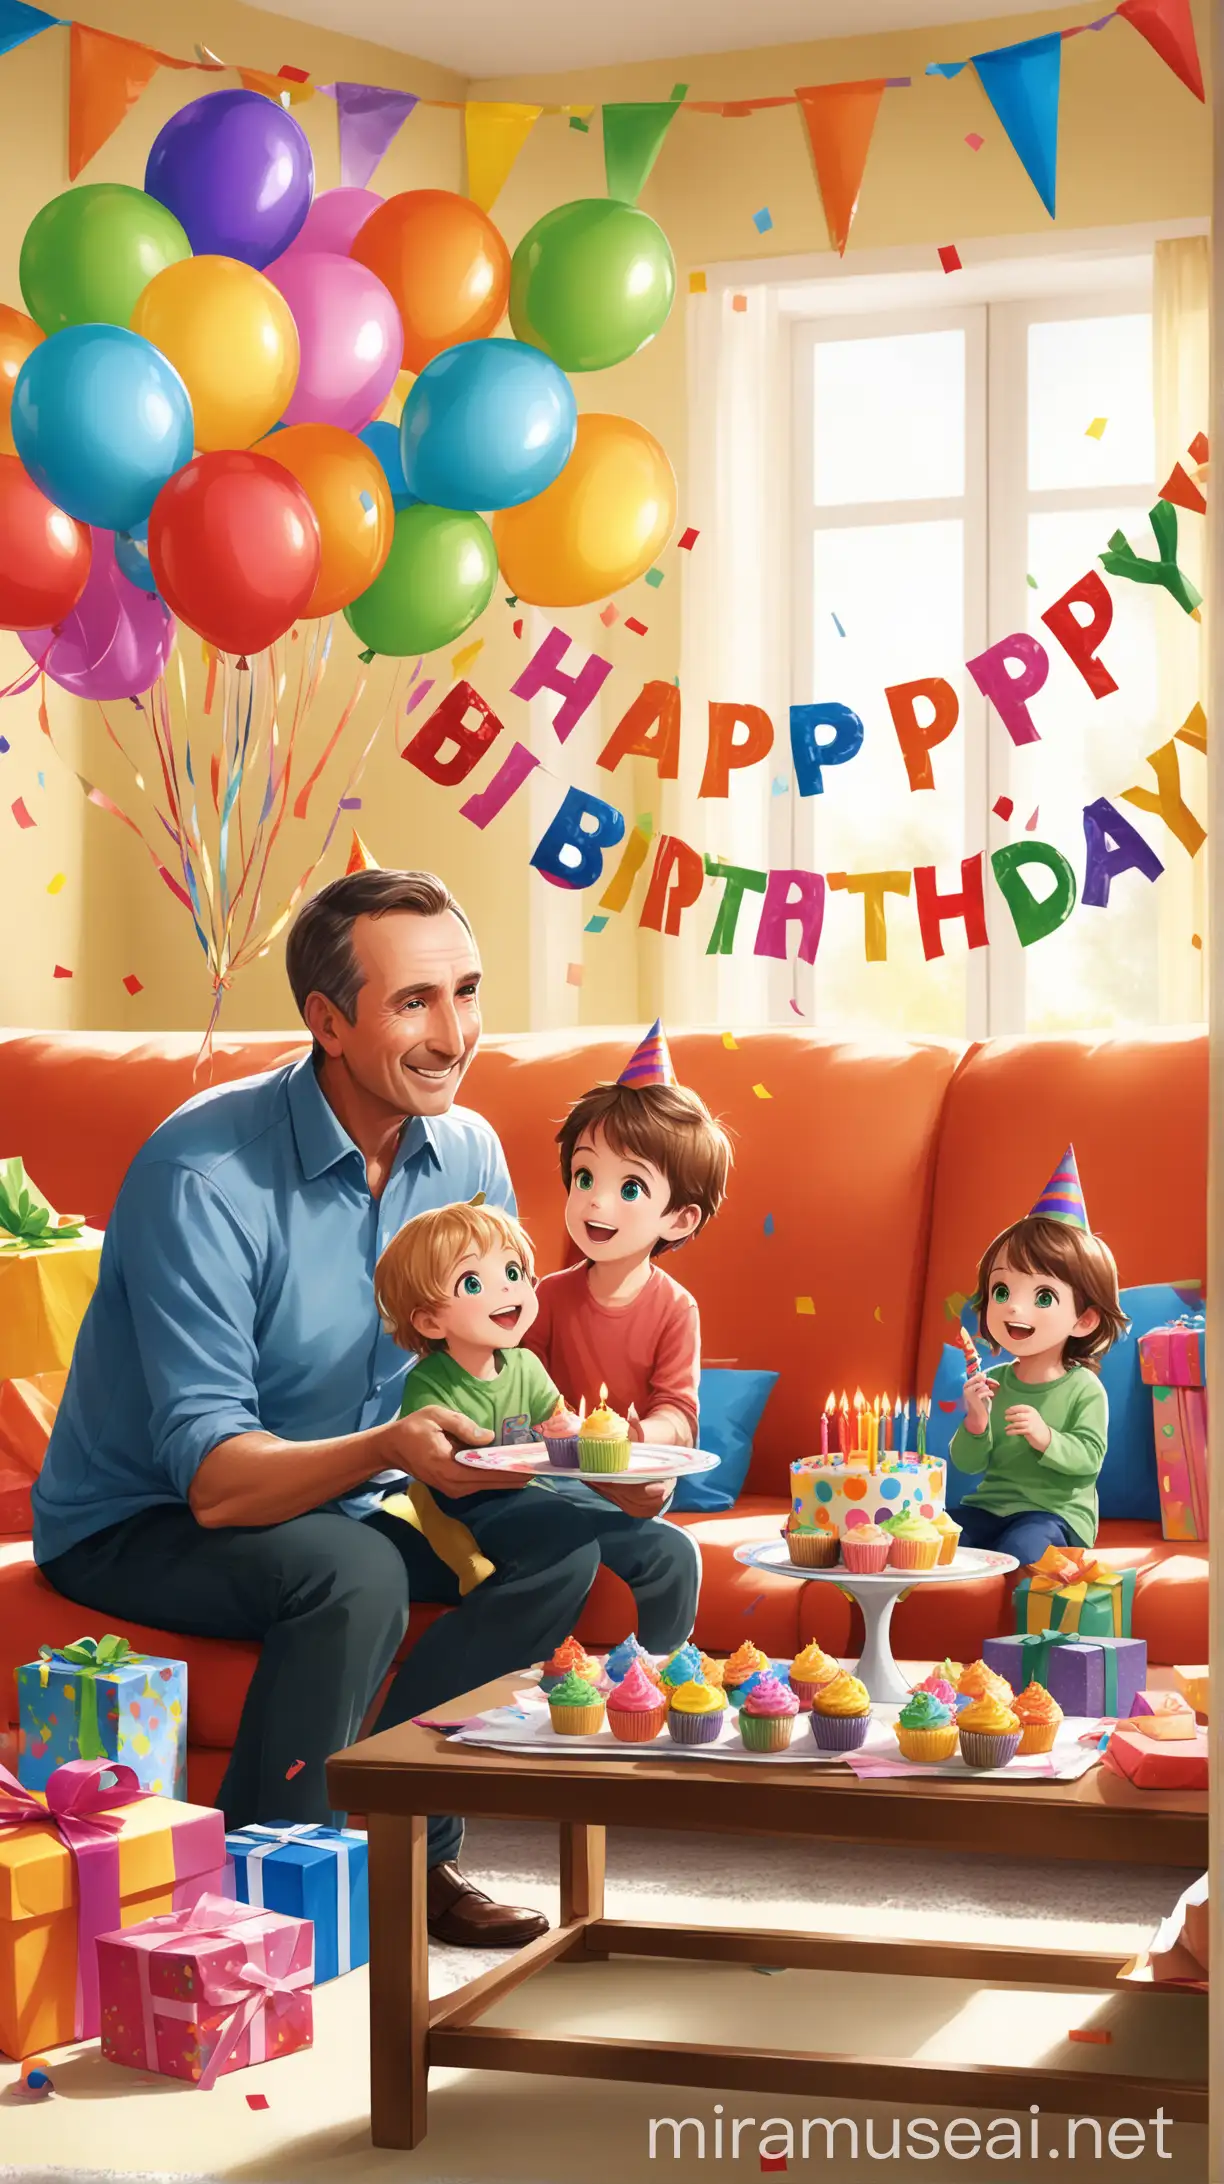 Create an image of a devoted dad standing in a warm, sunlit living room, facing away as he carefully pins up a "Happy Birthday" banner. He holds a roll of tape while adjusting vibrant paper lanterns. Nearby, a child stands excitedly, eyes wide with anticipation. The room is filled with bright balloons, rainbow streamers, and the scent of freshly baked cupcakes. A table is set with party hats, playful plates, and a cake adorned with the child's favorite characters. Presents wrapped in cheerful paper sit on a cozy sofa. Every detail should reflect the dad's love and dedication to making his child's birthday magical.